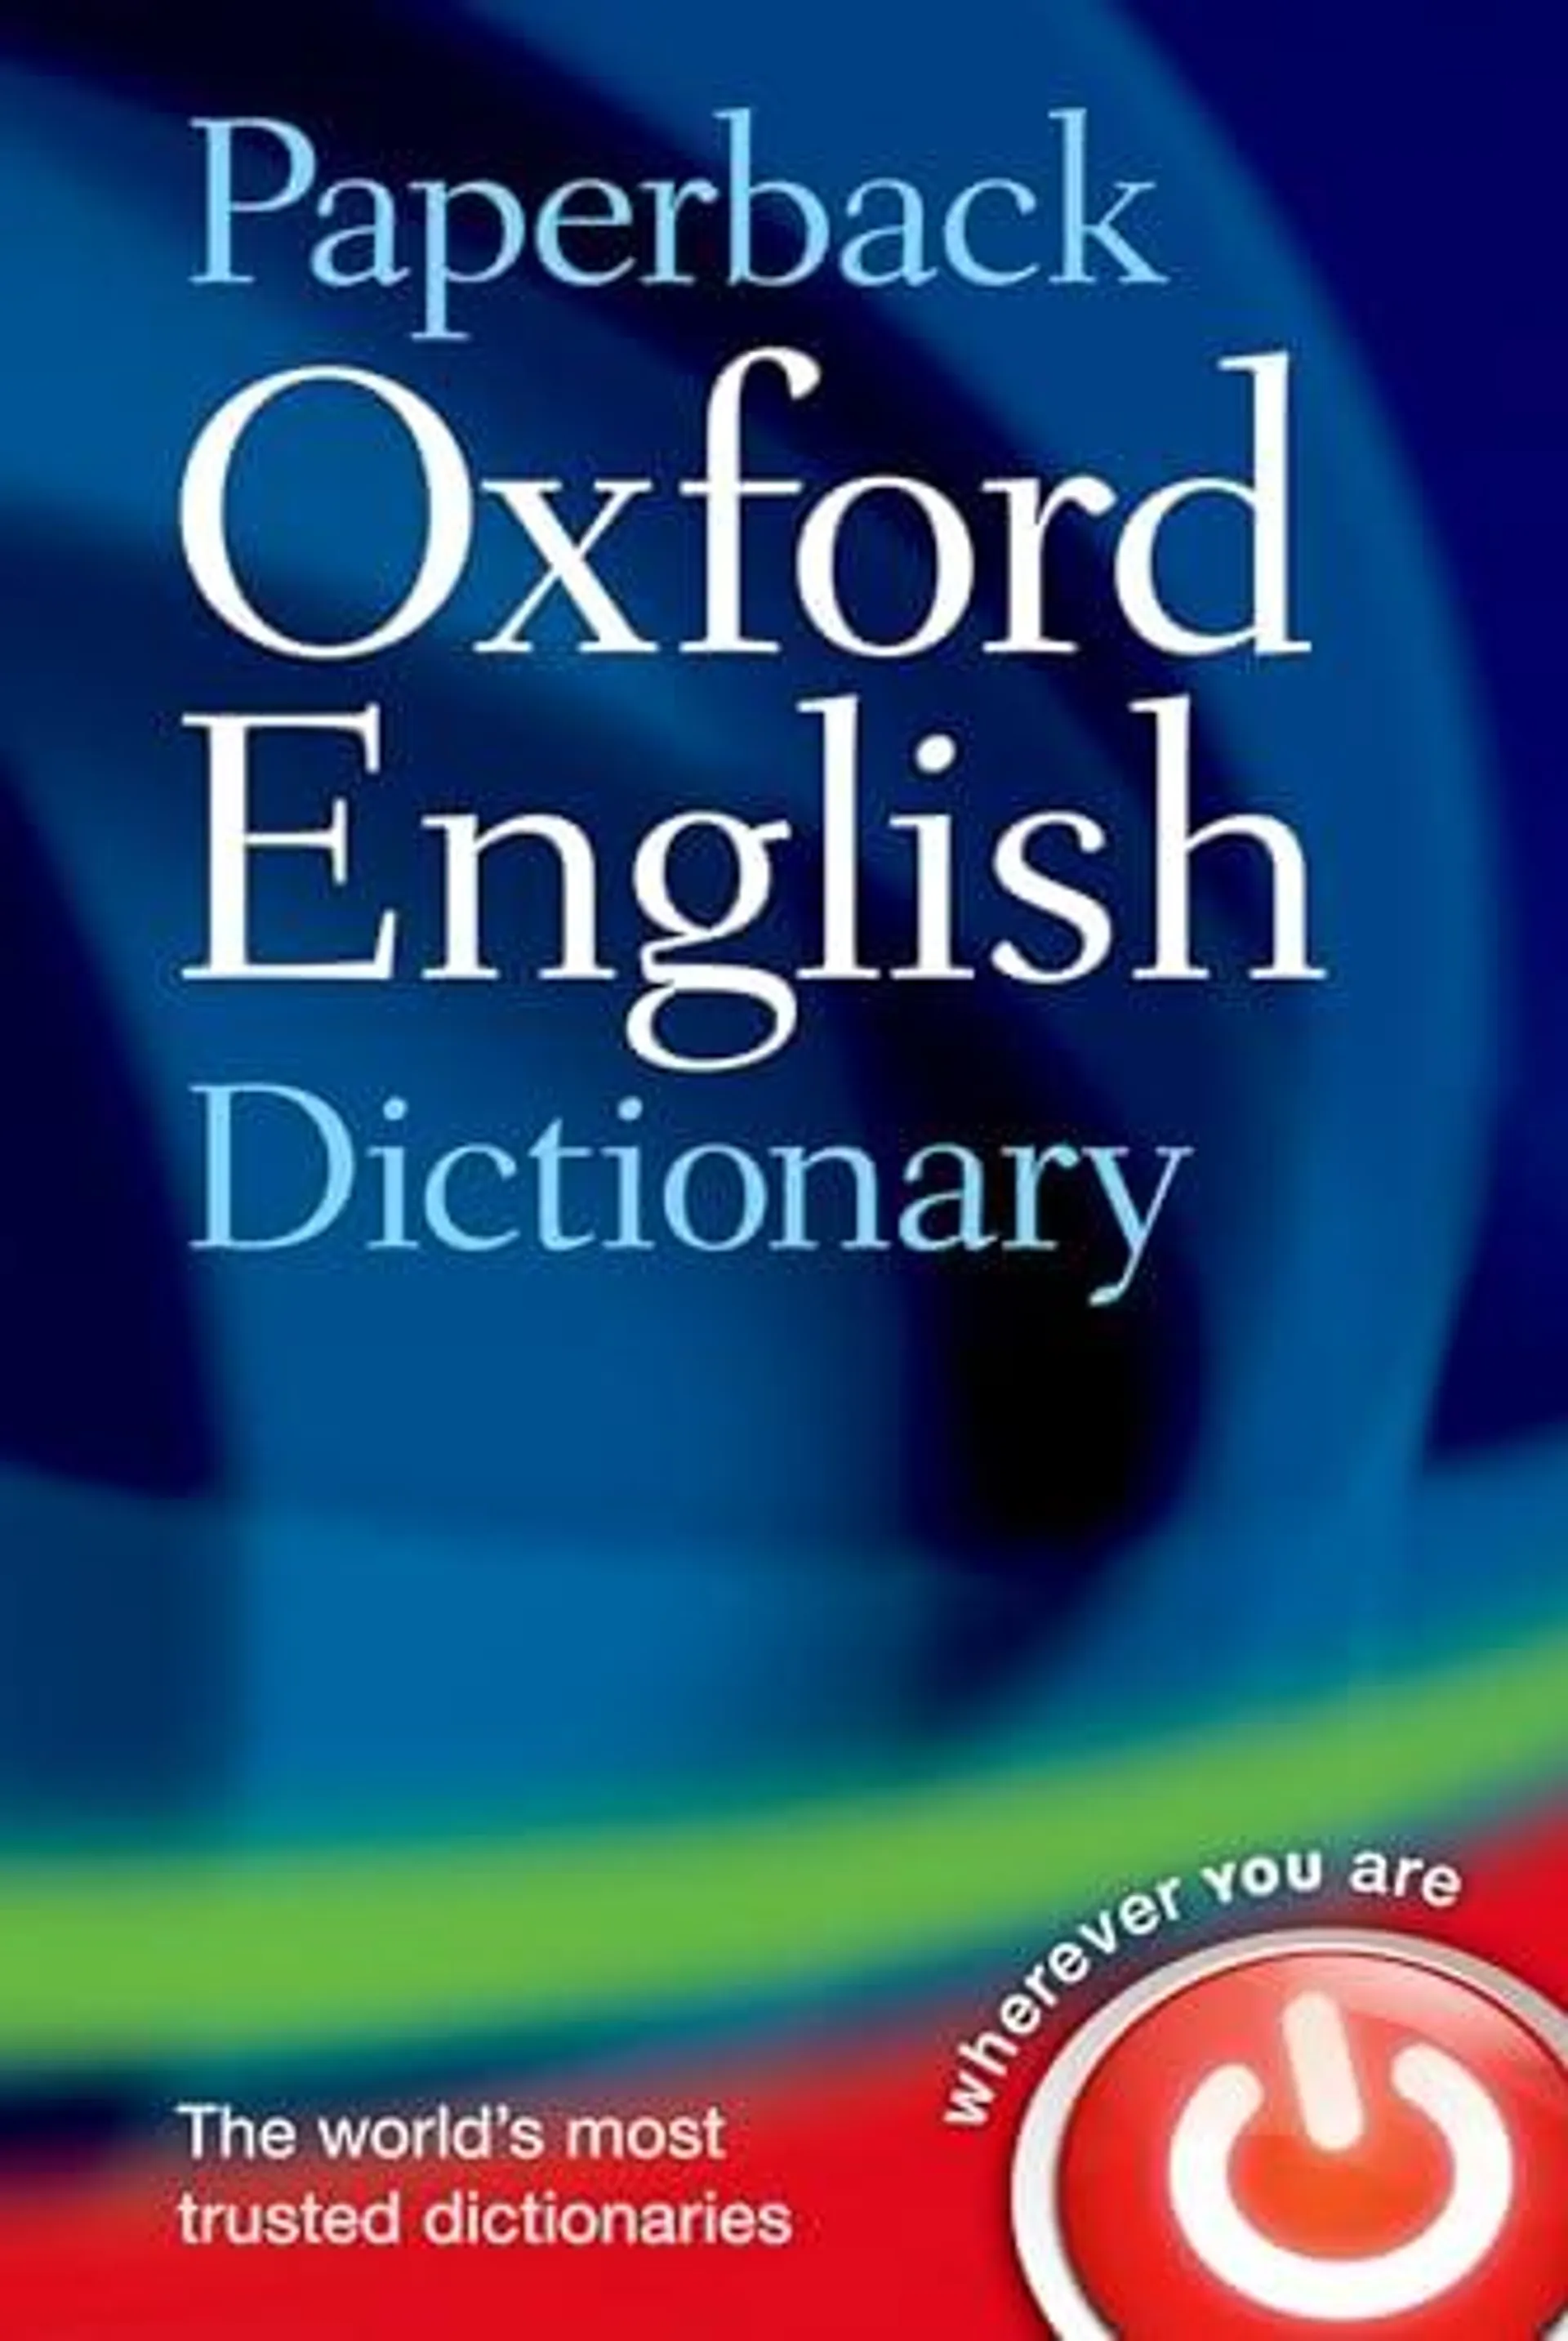 Paperback Oxford English Dictionary by Oxford Languages